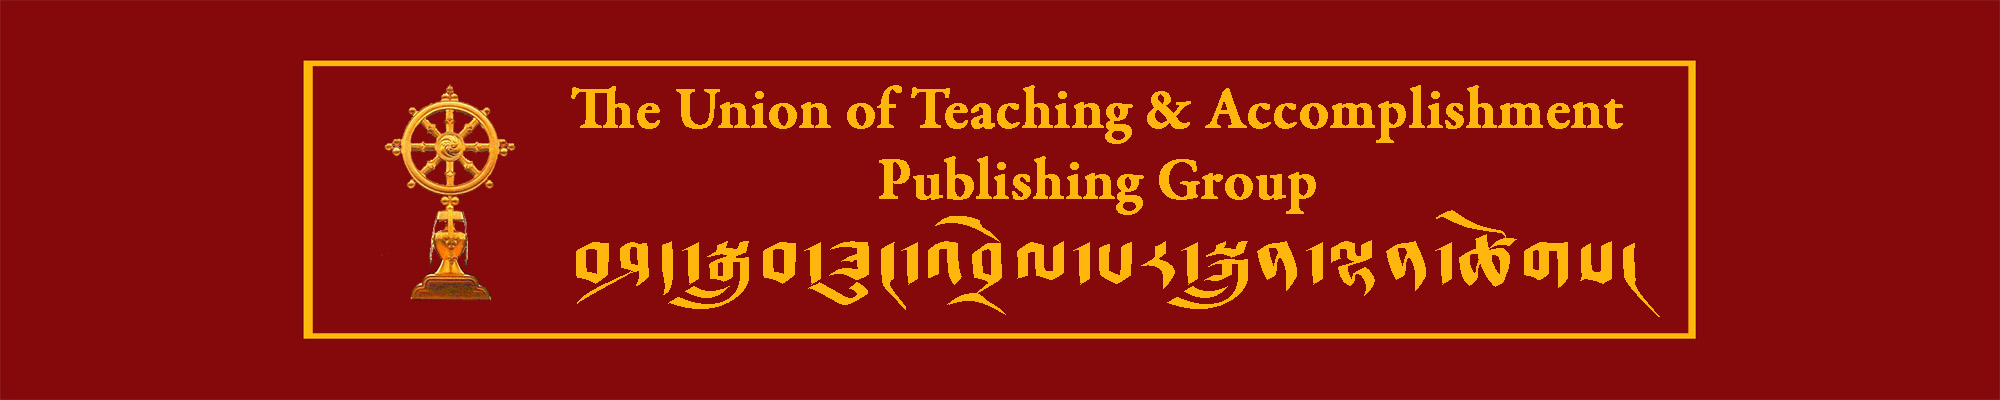 The Union of Teaching and Accomplishment Publishing Group